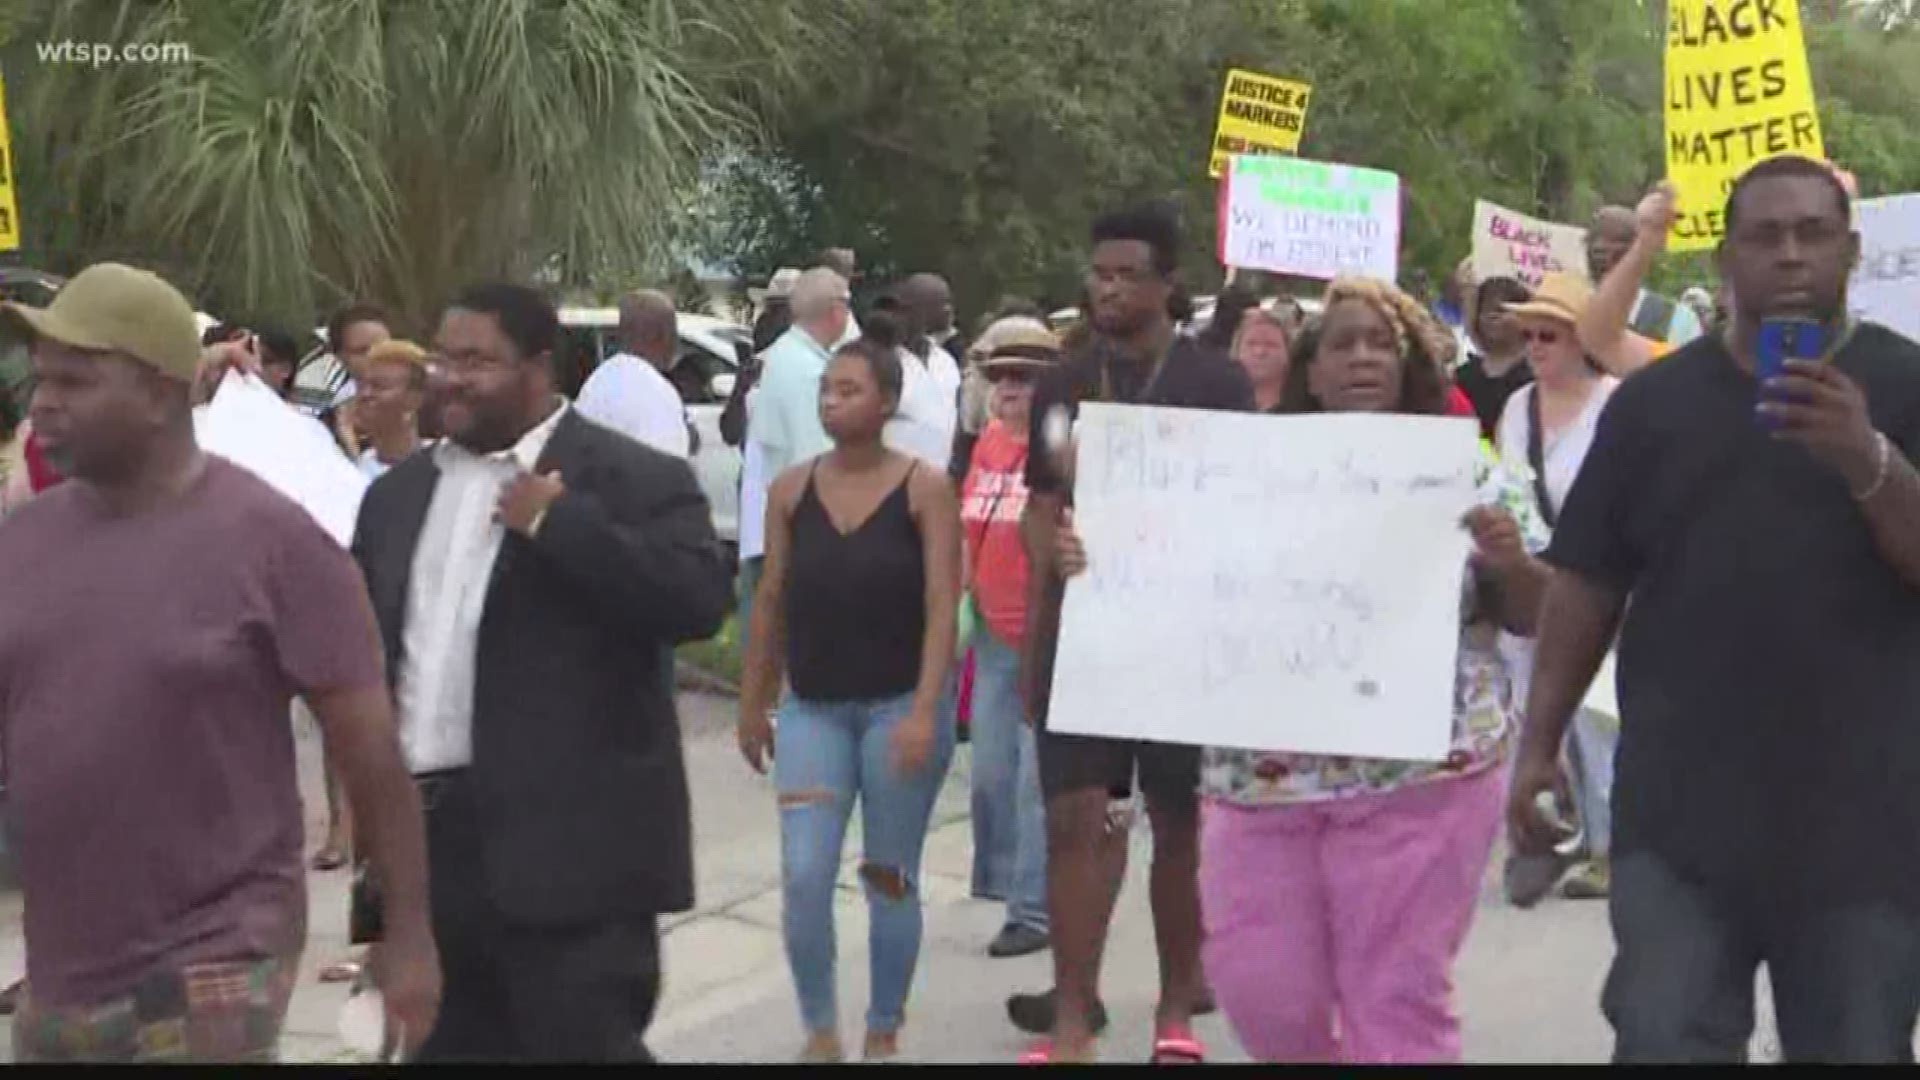 Protesters called for justice in Clearwater after a man was shot and killed. The shooter was not arrested because of "Stand Your Ground Laws" 